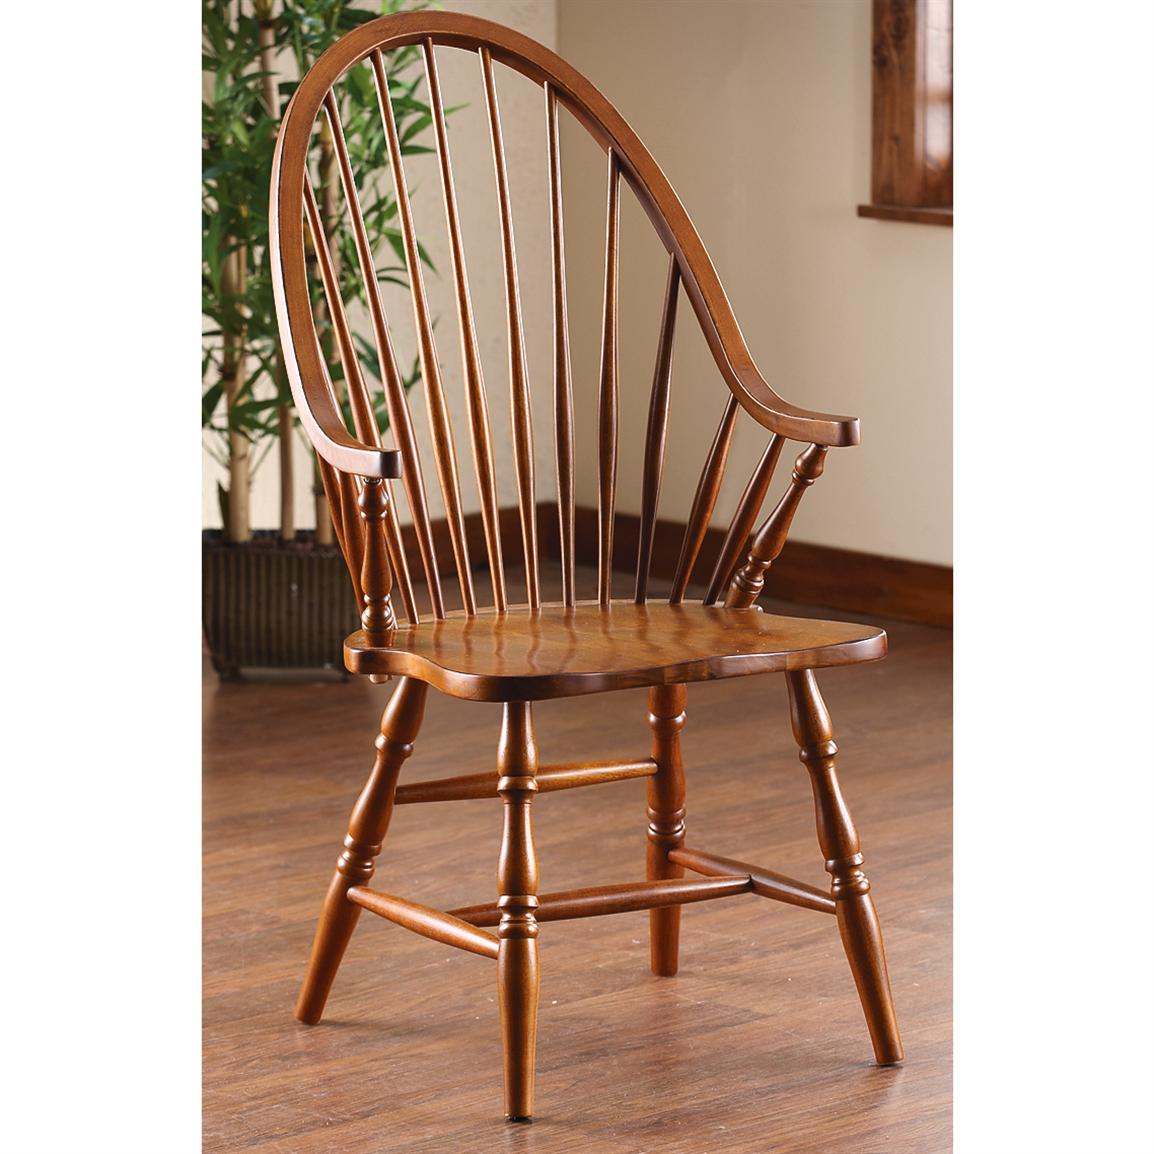 Windsor Arm Chair - 190946, Kitchen & Dining at Sportsman's Guide